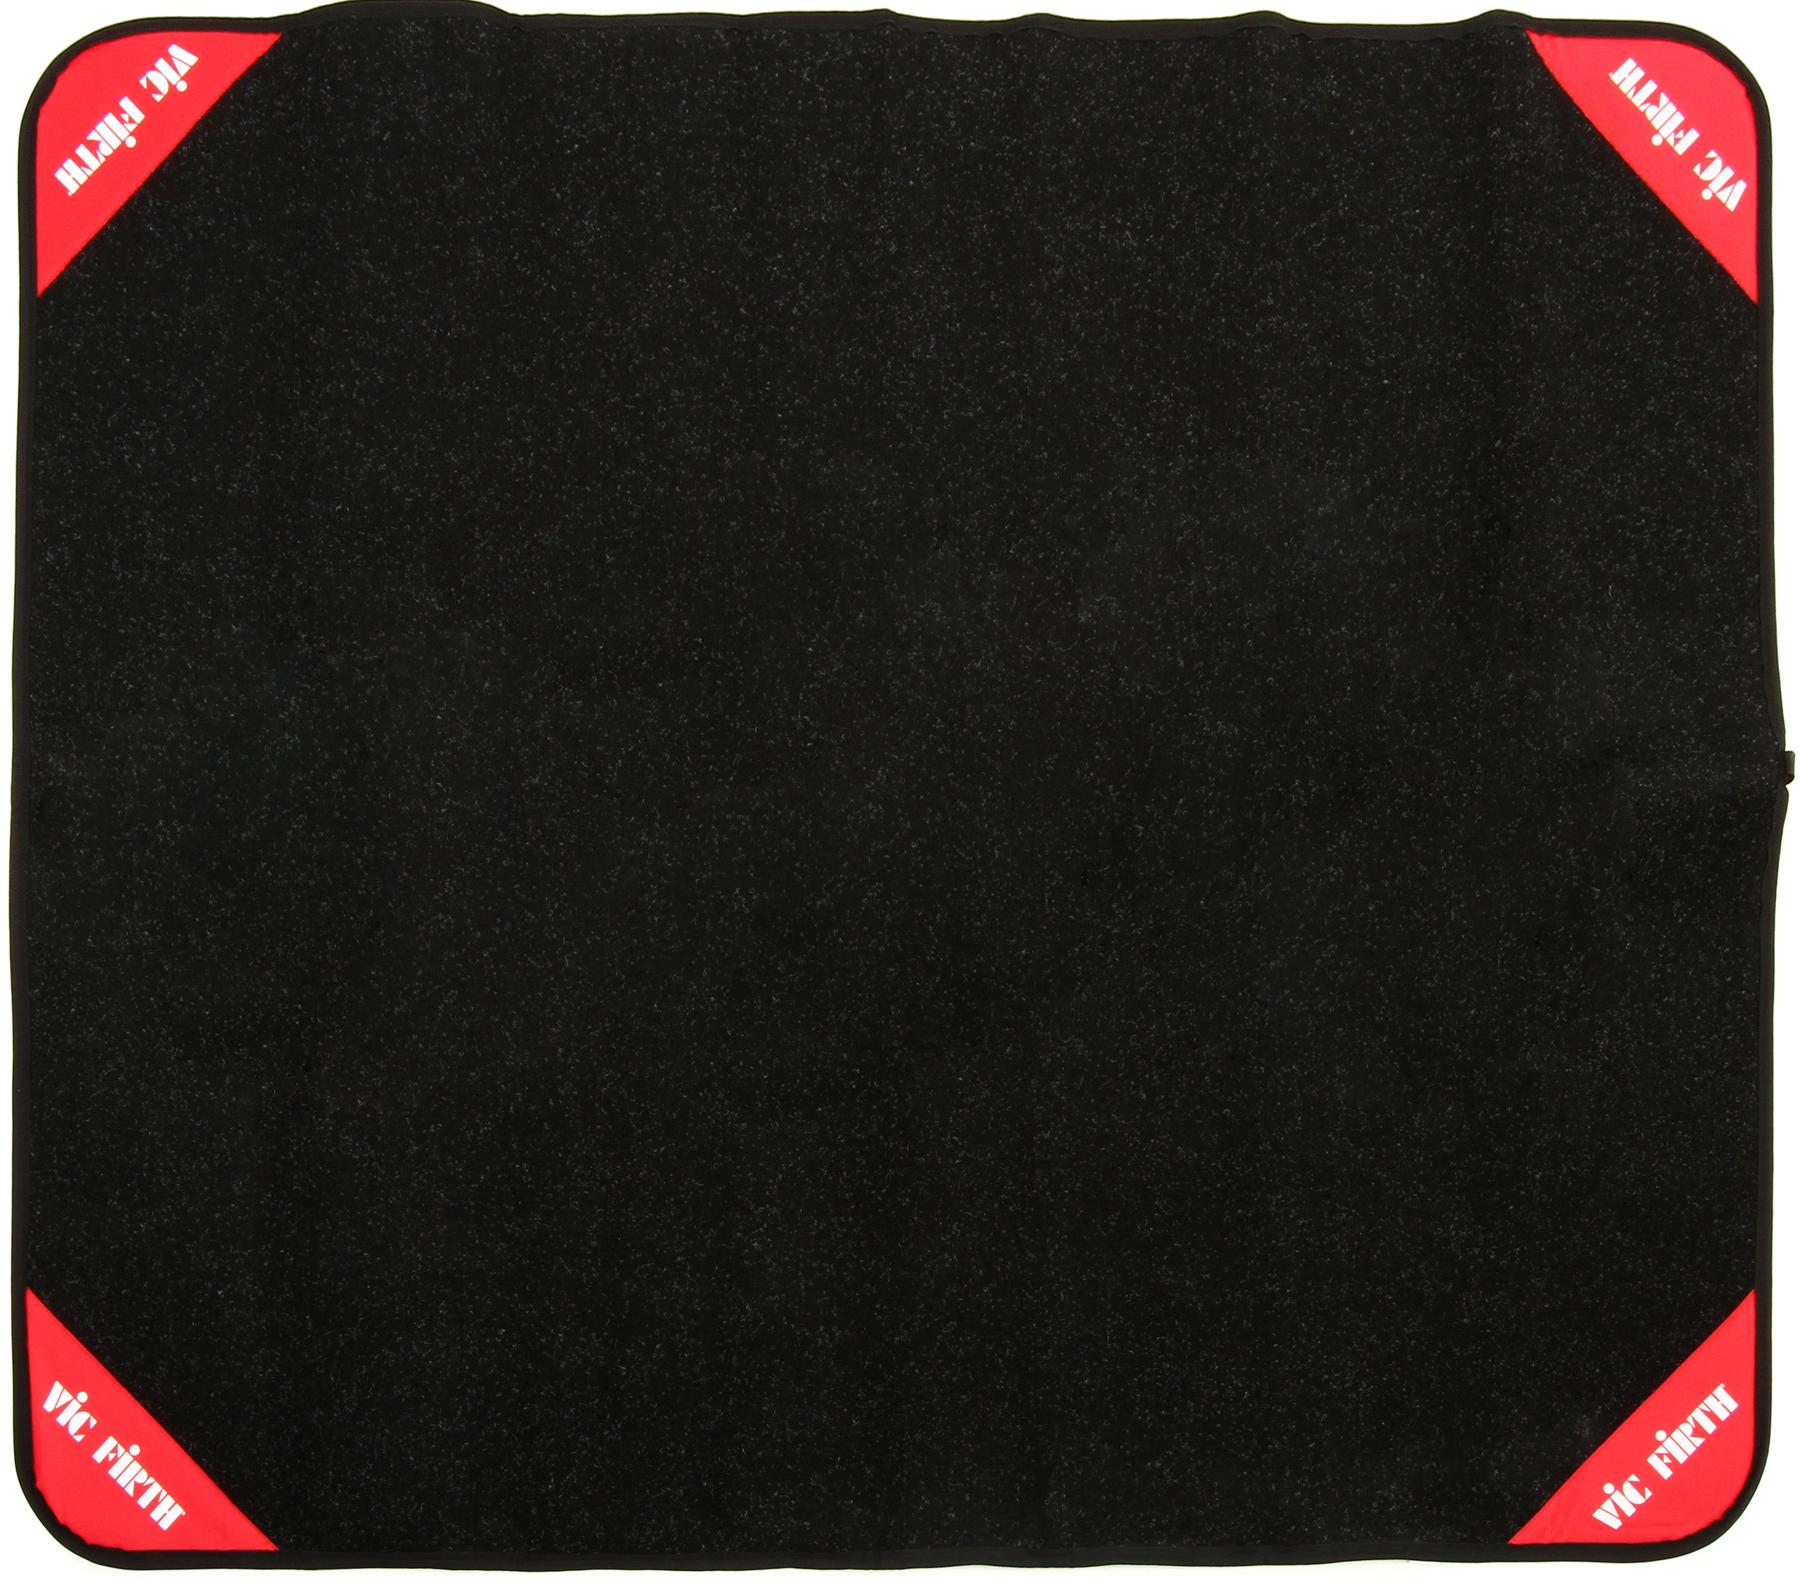 5. Vic Firth Deluxe Drum Set Rug (VICRUG1)